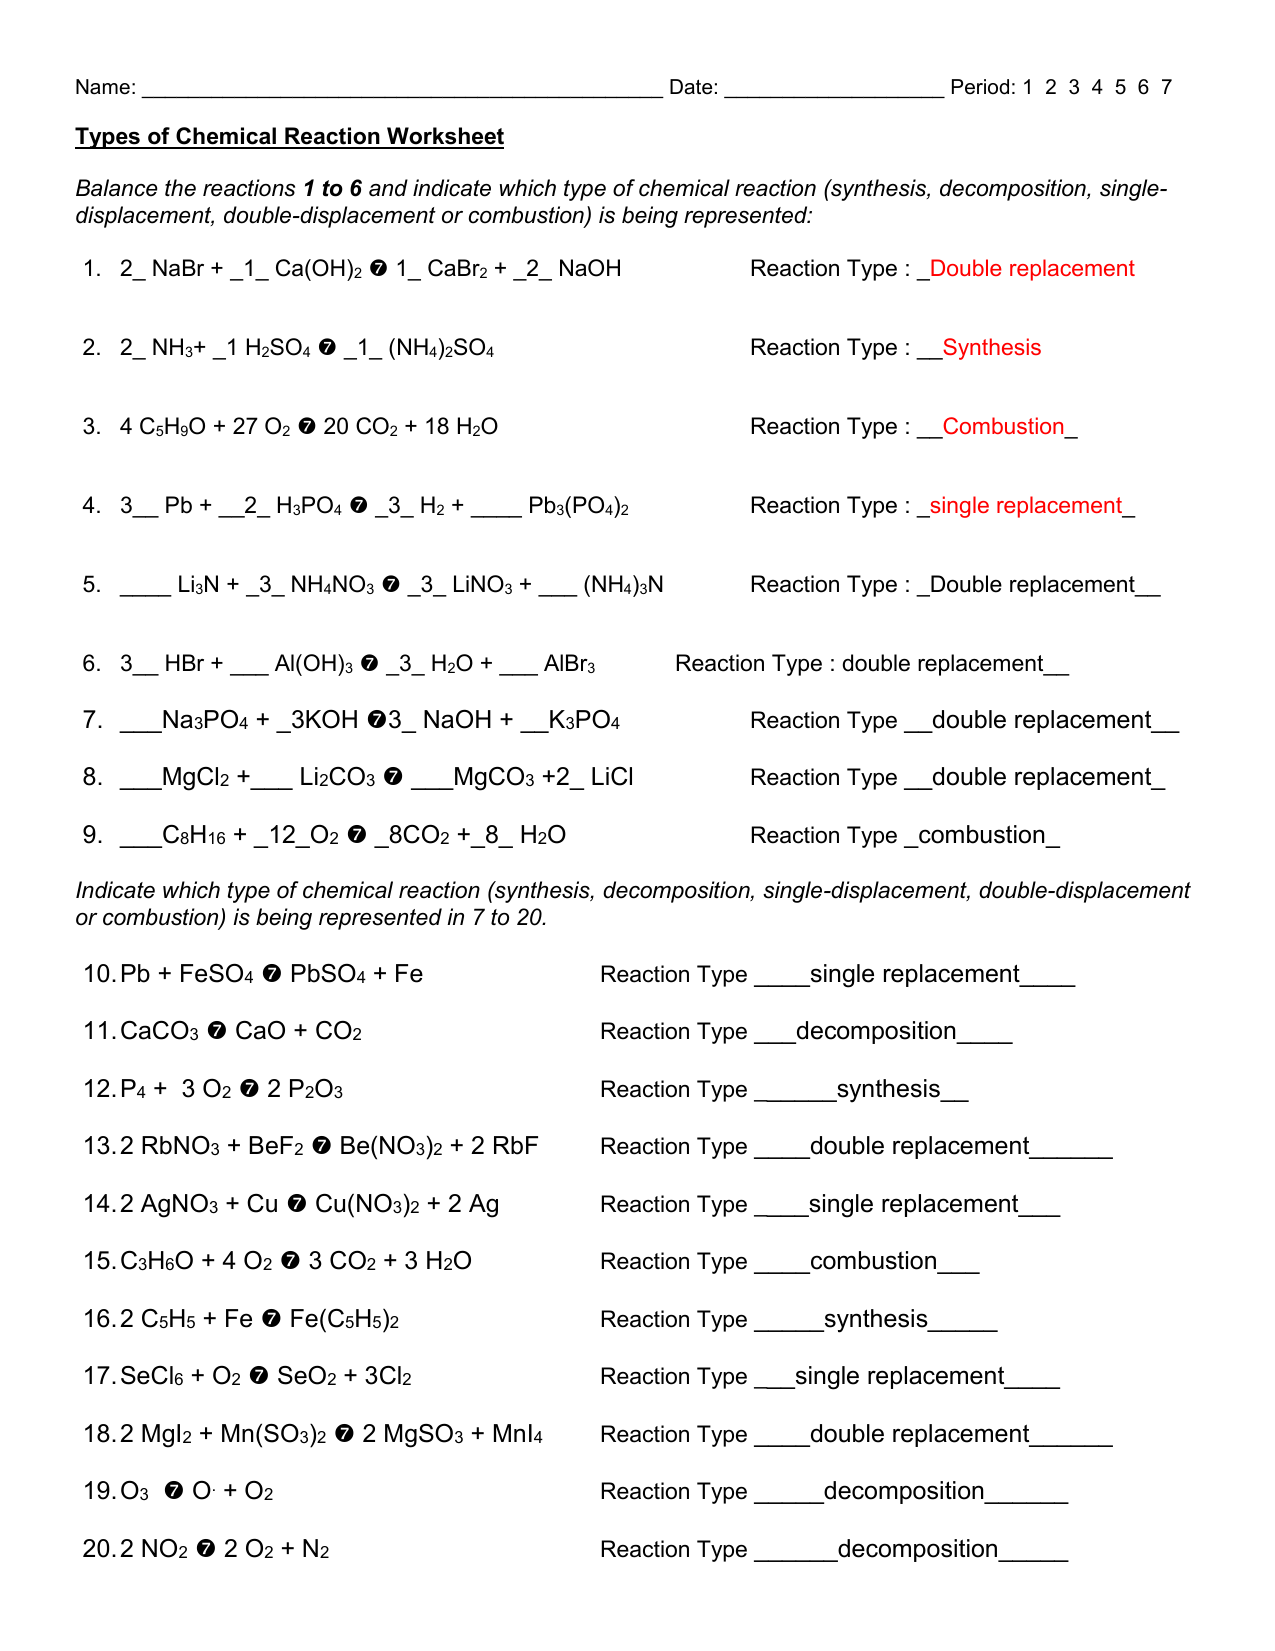 Types of Chemical Reaction Worksheetanswers For Chemical Reactions Types Worksheet